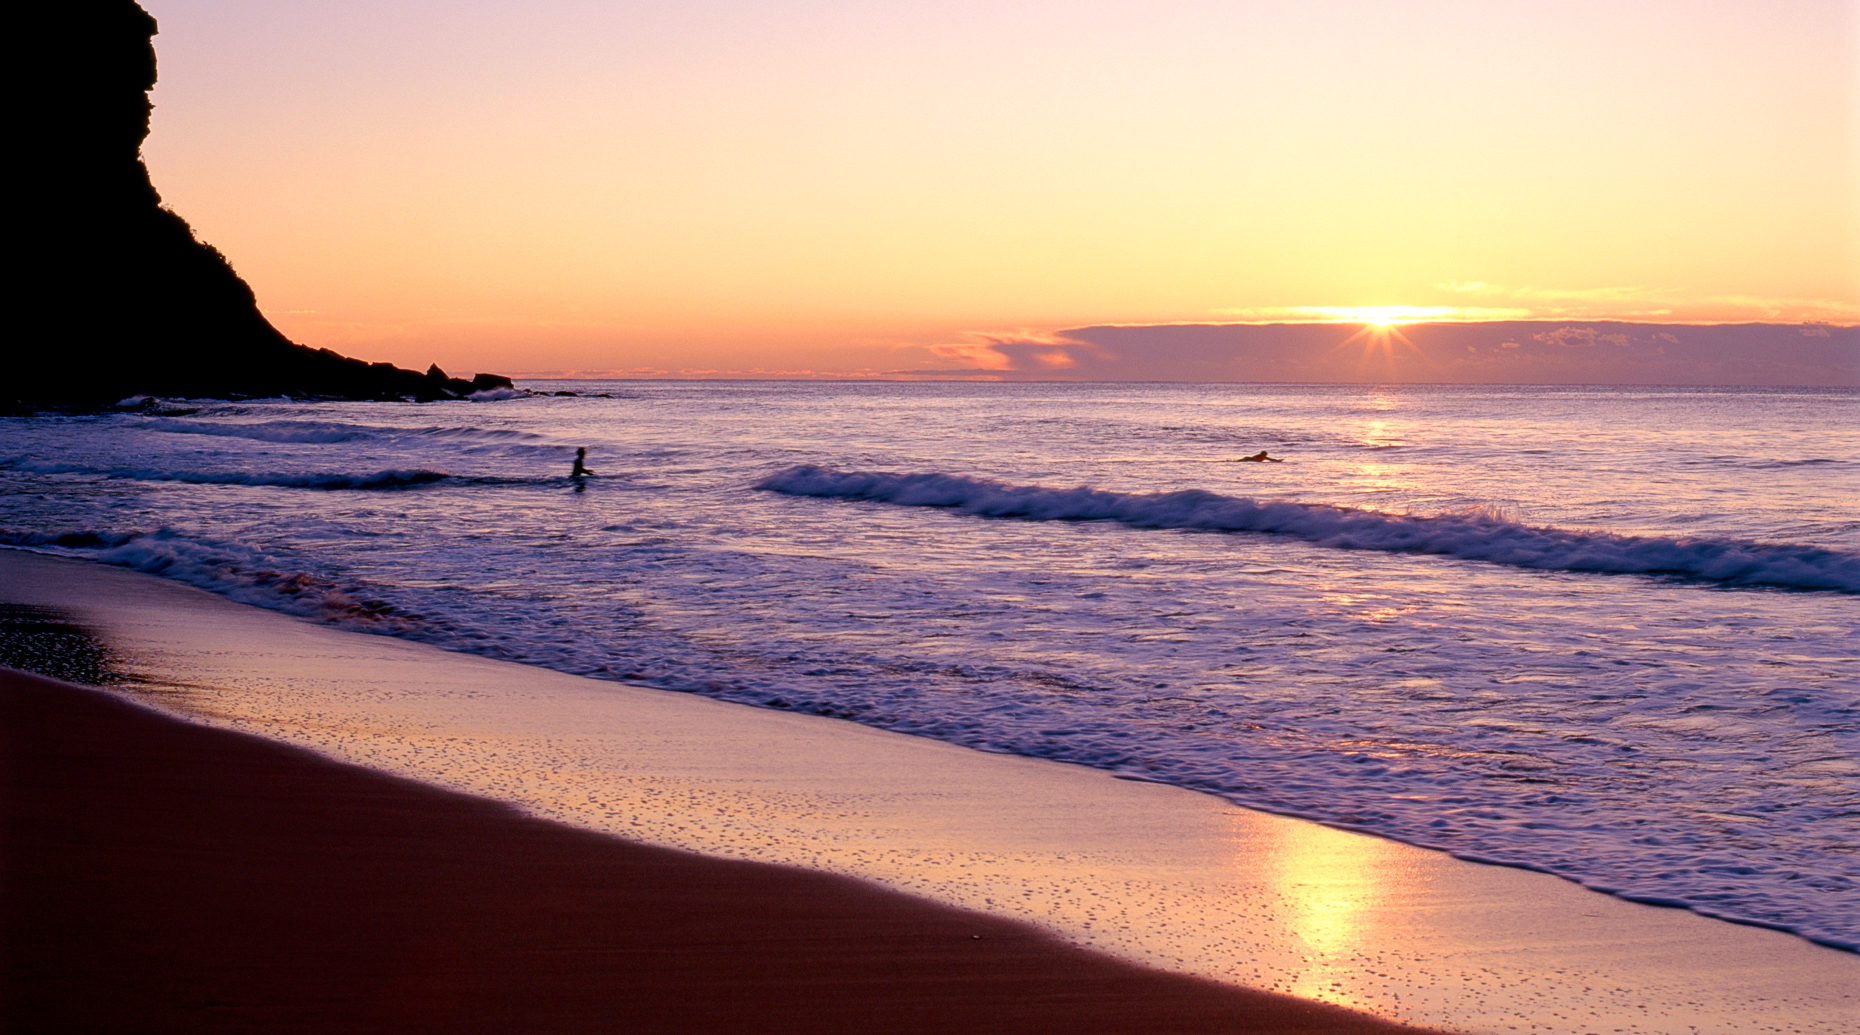 Surfers head out at sunrise at Bungan Beach, New South Wales, Au